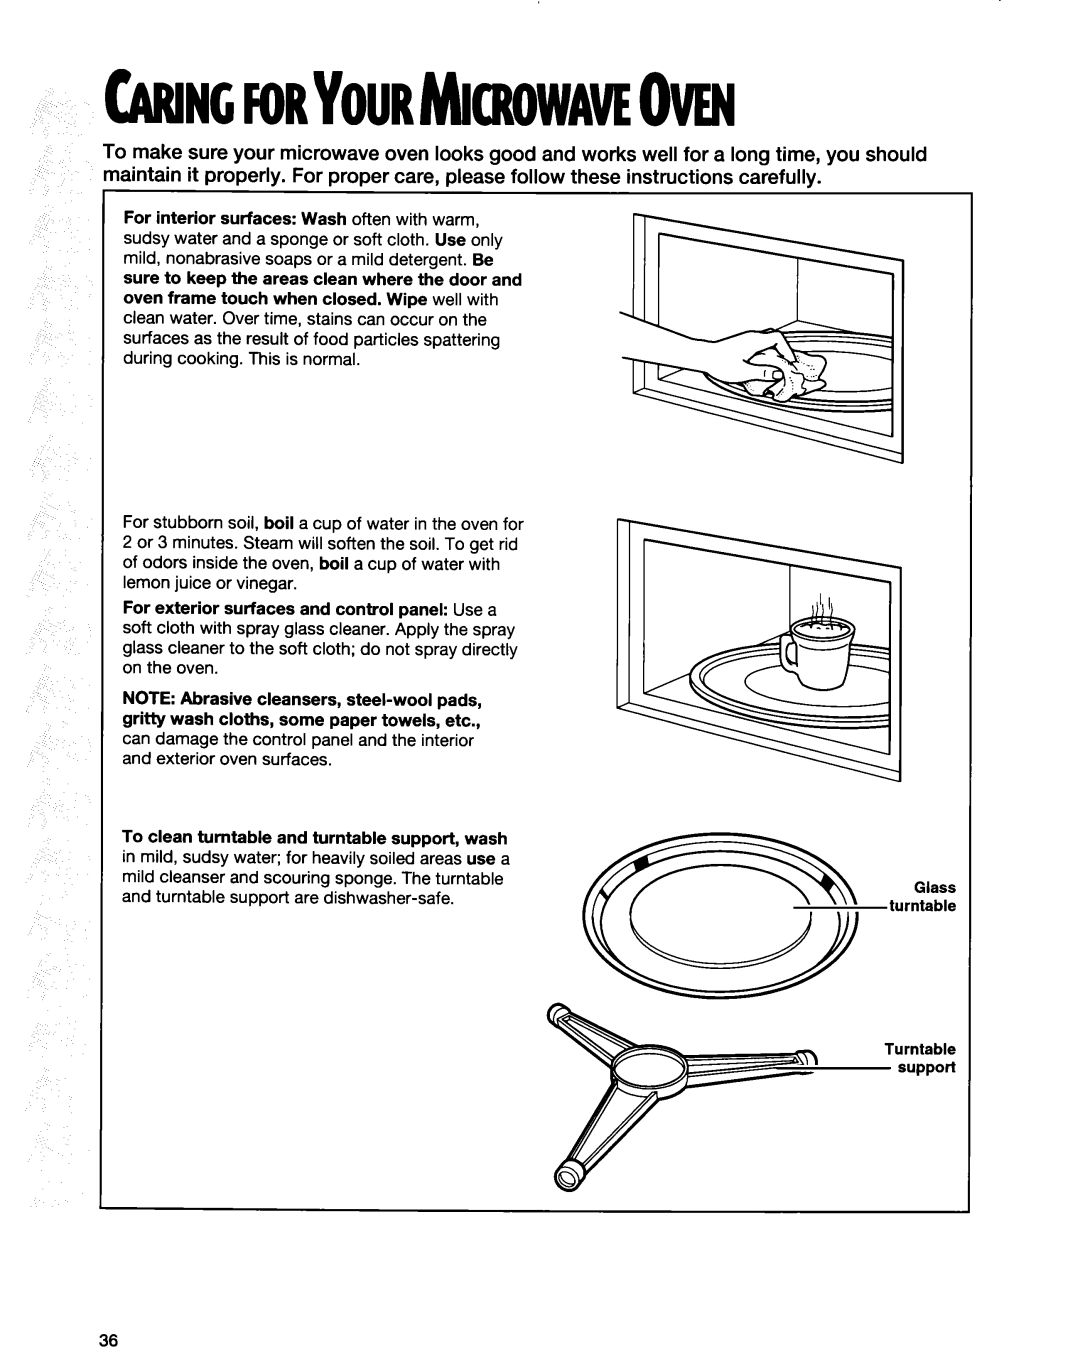 Whirlpool MT9160XE, MT6120XE installation instructions Caringforyourmicrowaveoven, support 